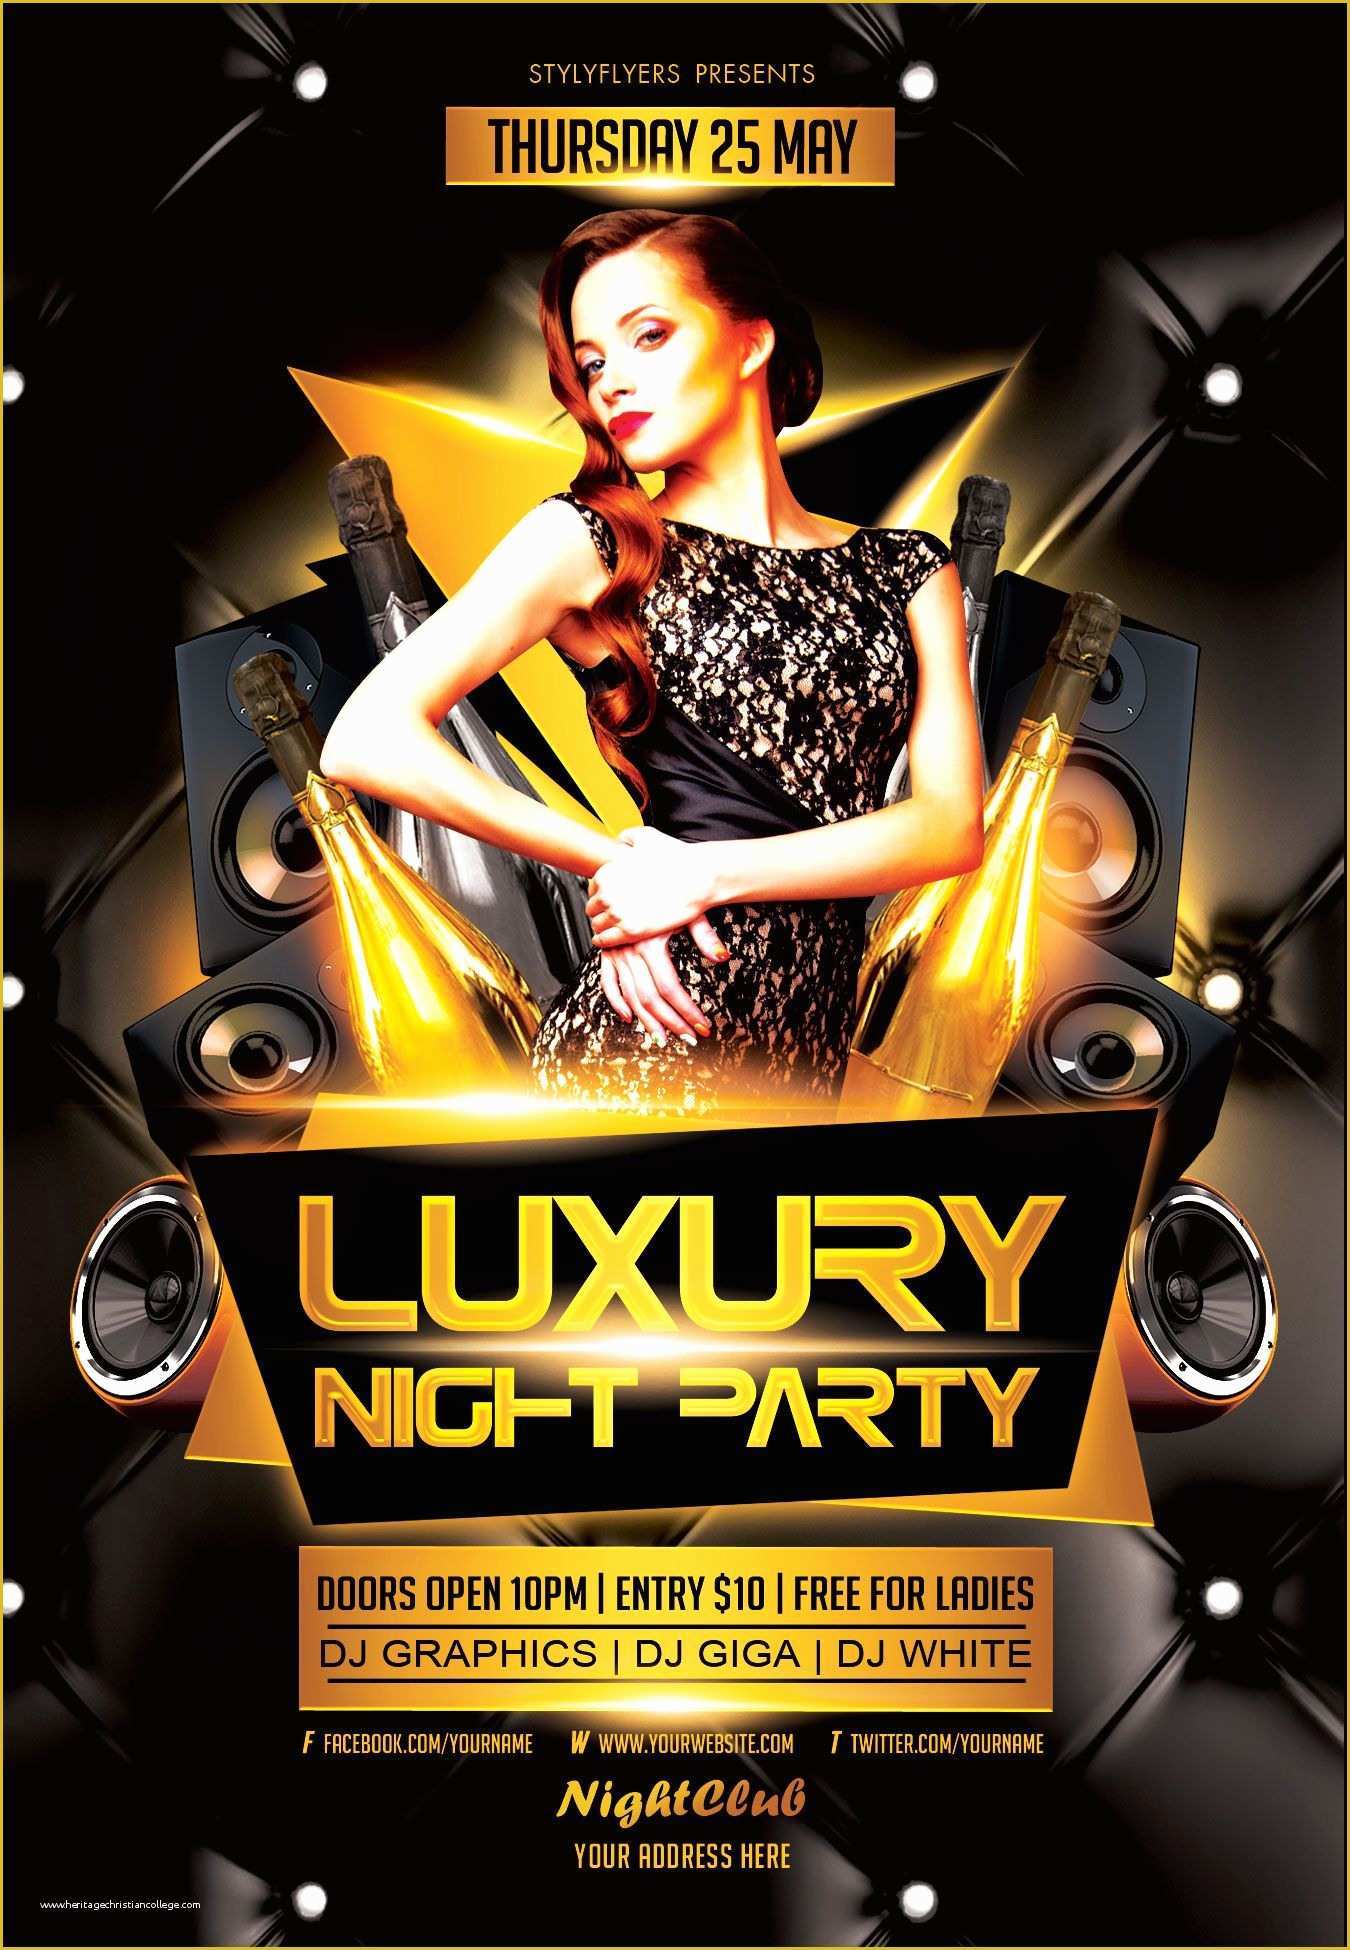 Celebration Flyer Template Free Of Free Luxury Night Party Flyer Psd Template by Styleflyer